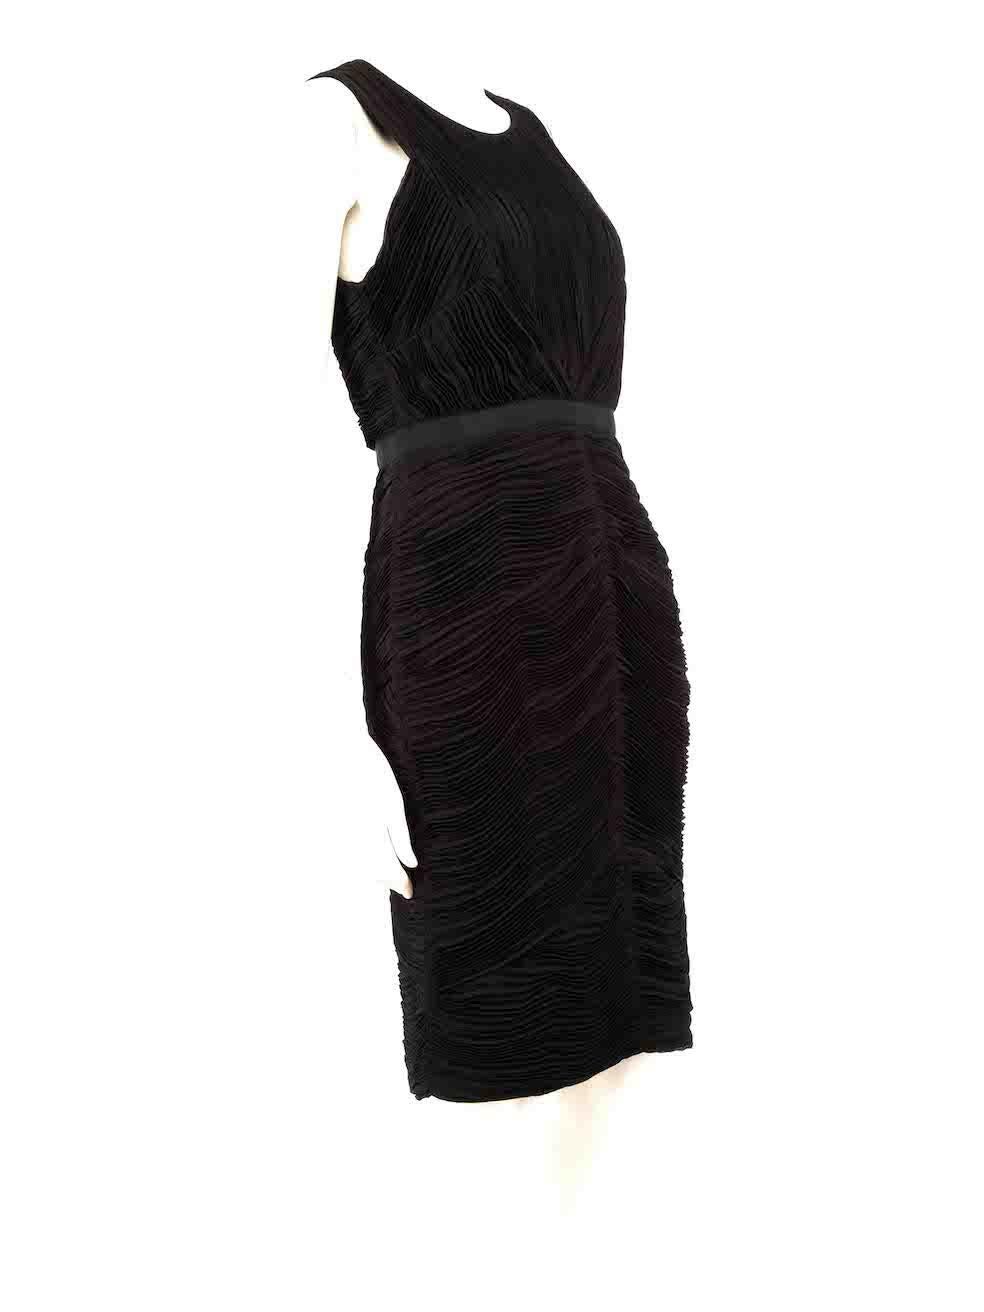 CONDITION is Very good. Hardly any visible wear to dress is evident. However, the composition label has been removed on this used Burberry designer resale item.
 
 
 
 Details
 
 
 Black
 
 Synthetic
 
 Dress
 
 Ruched micro pleat detail
 
